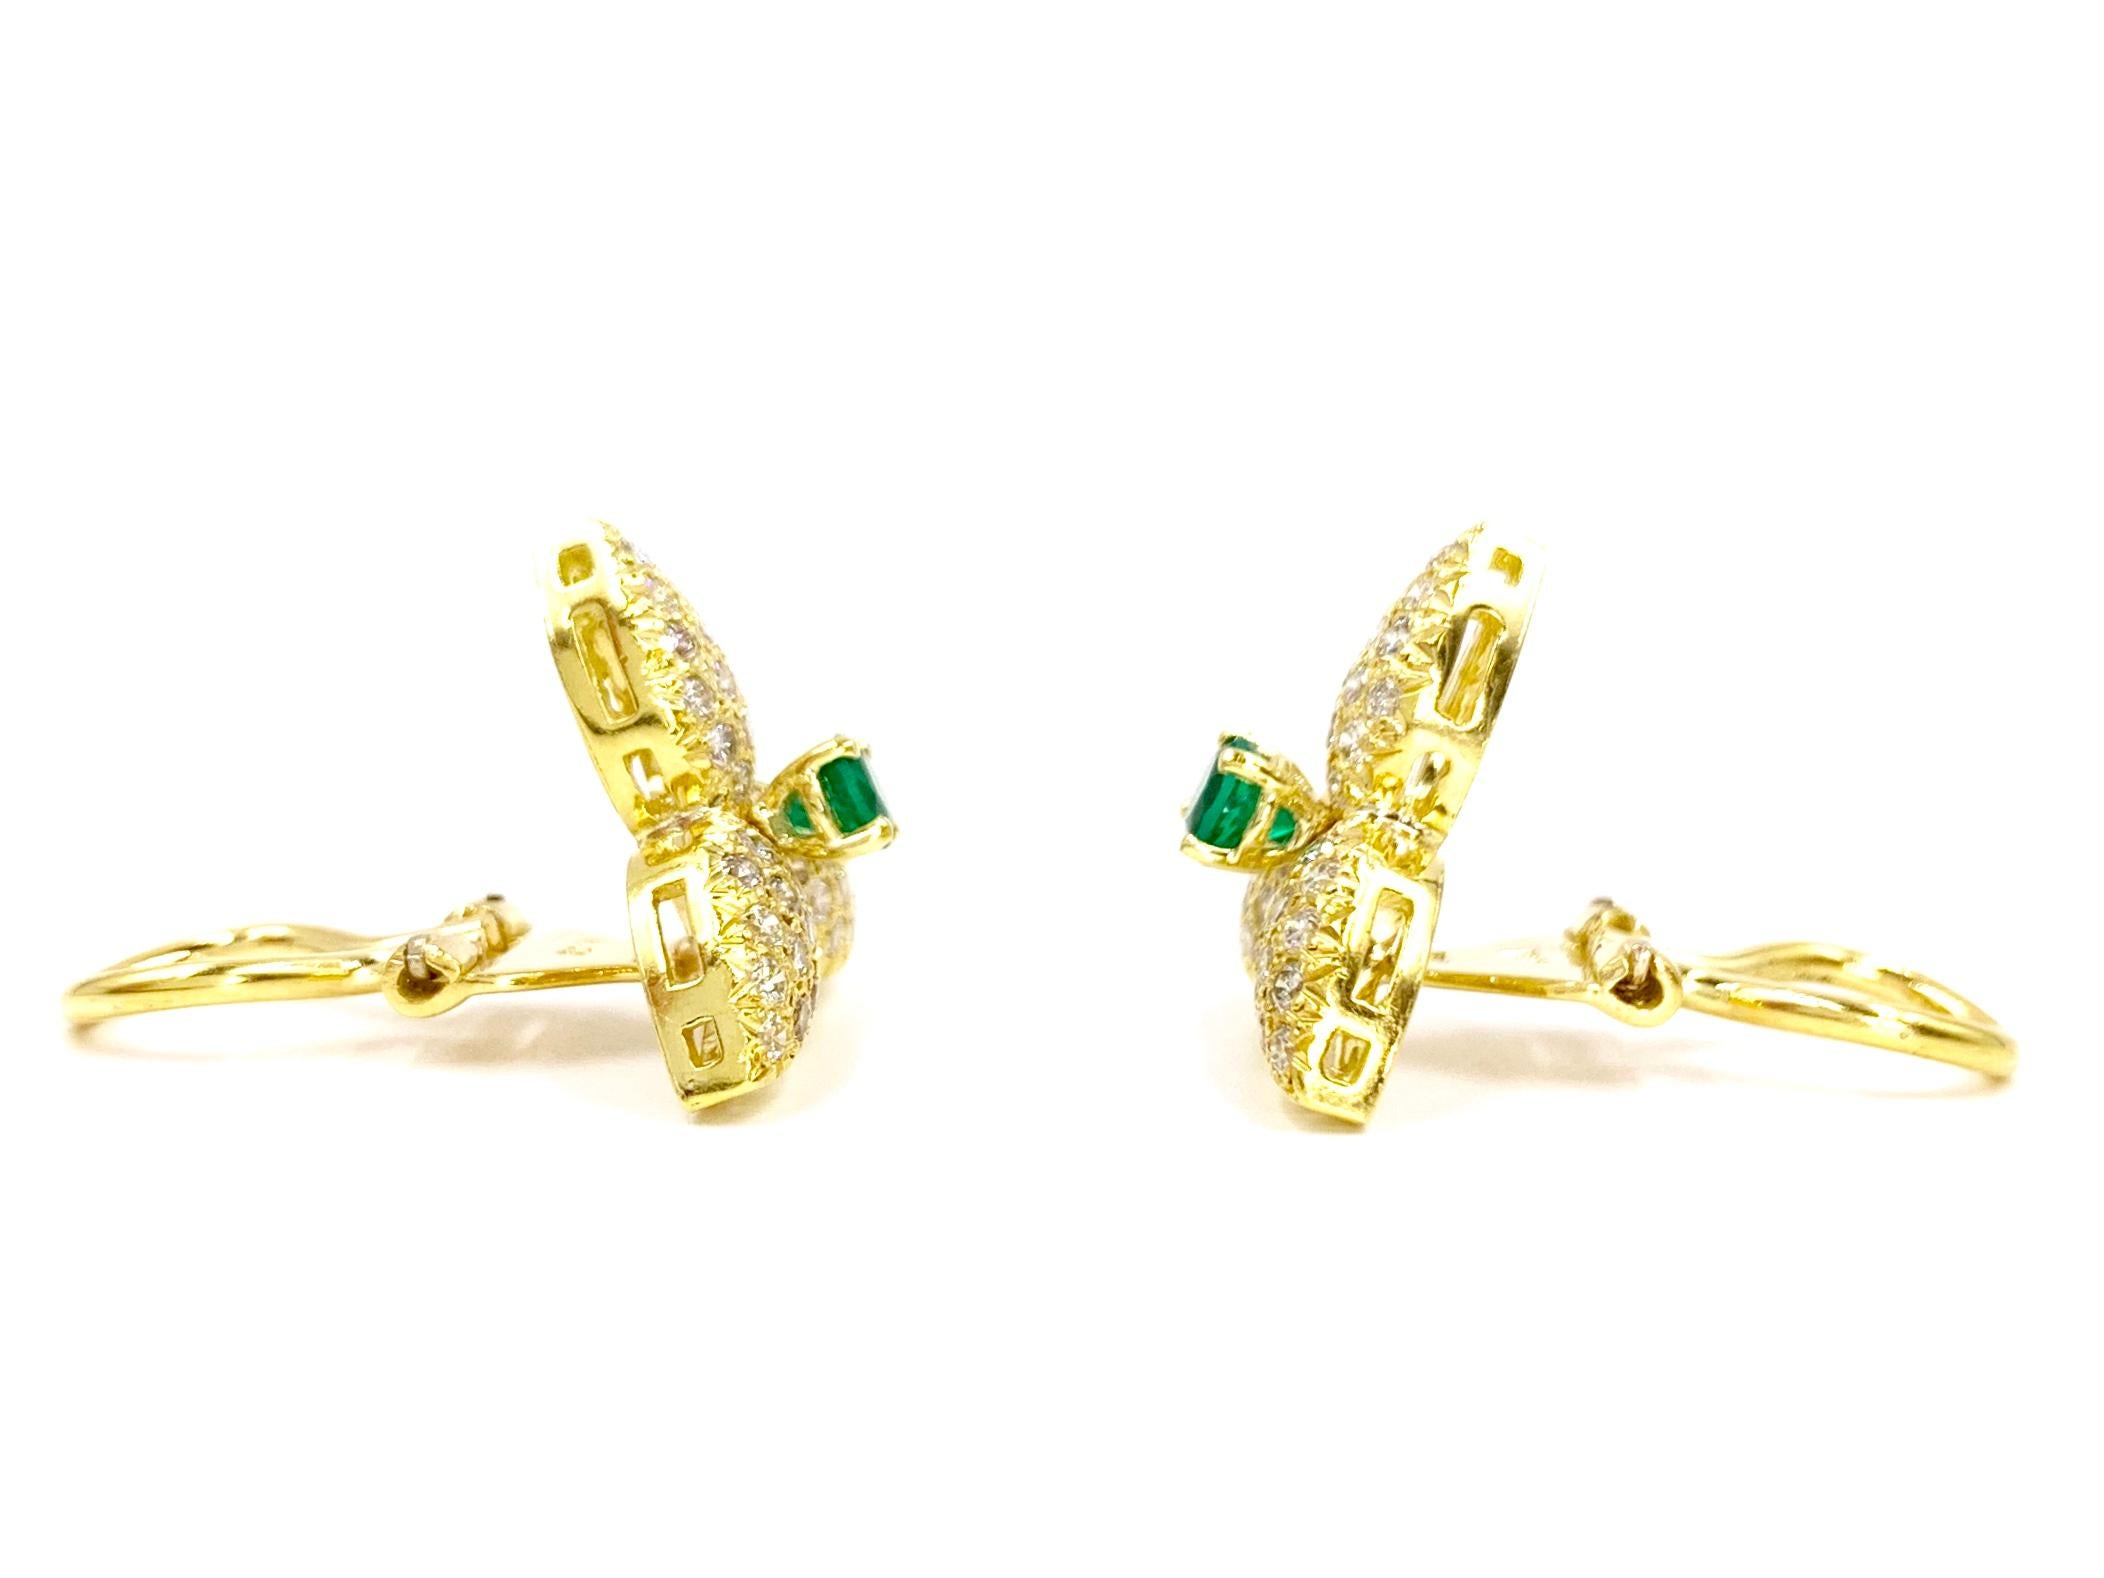 Contemporary 18 Karat Diamond and Emerald Floral Earrings For Sale